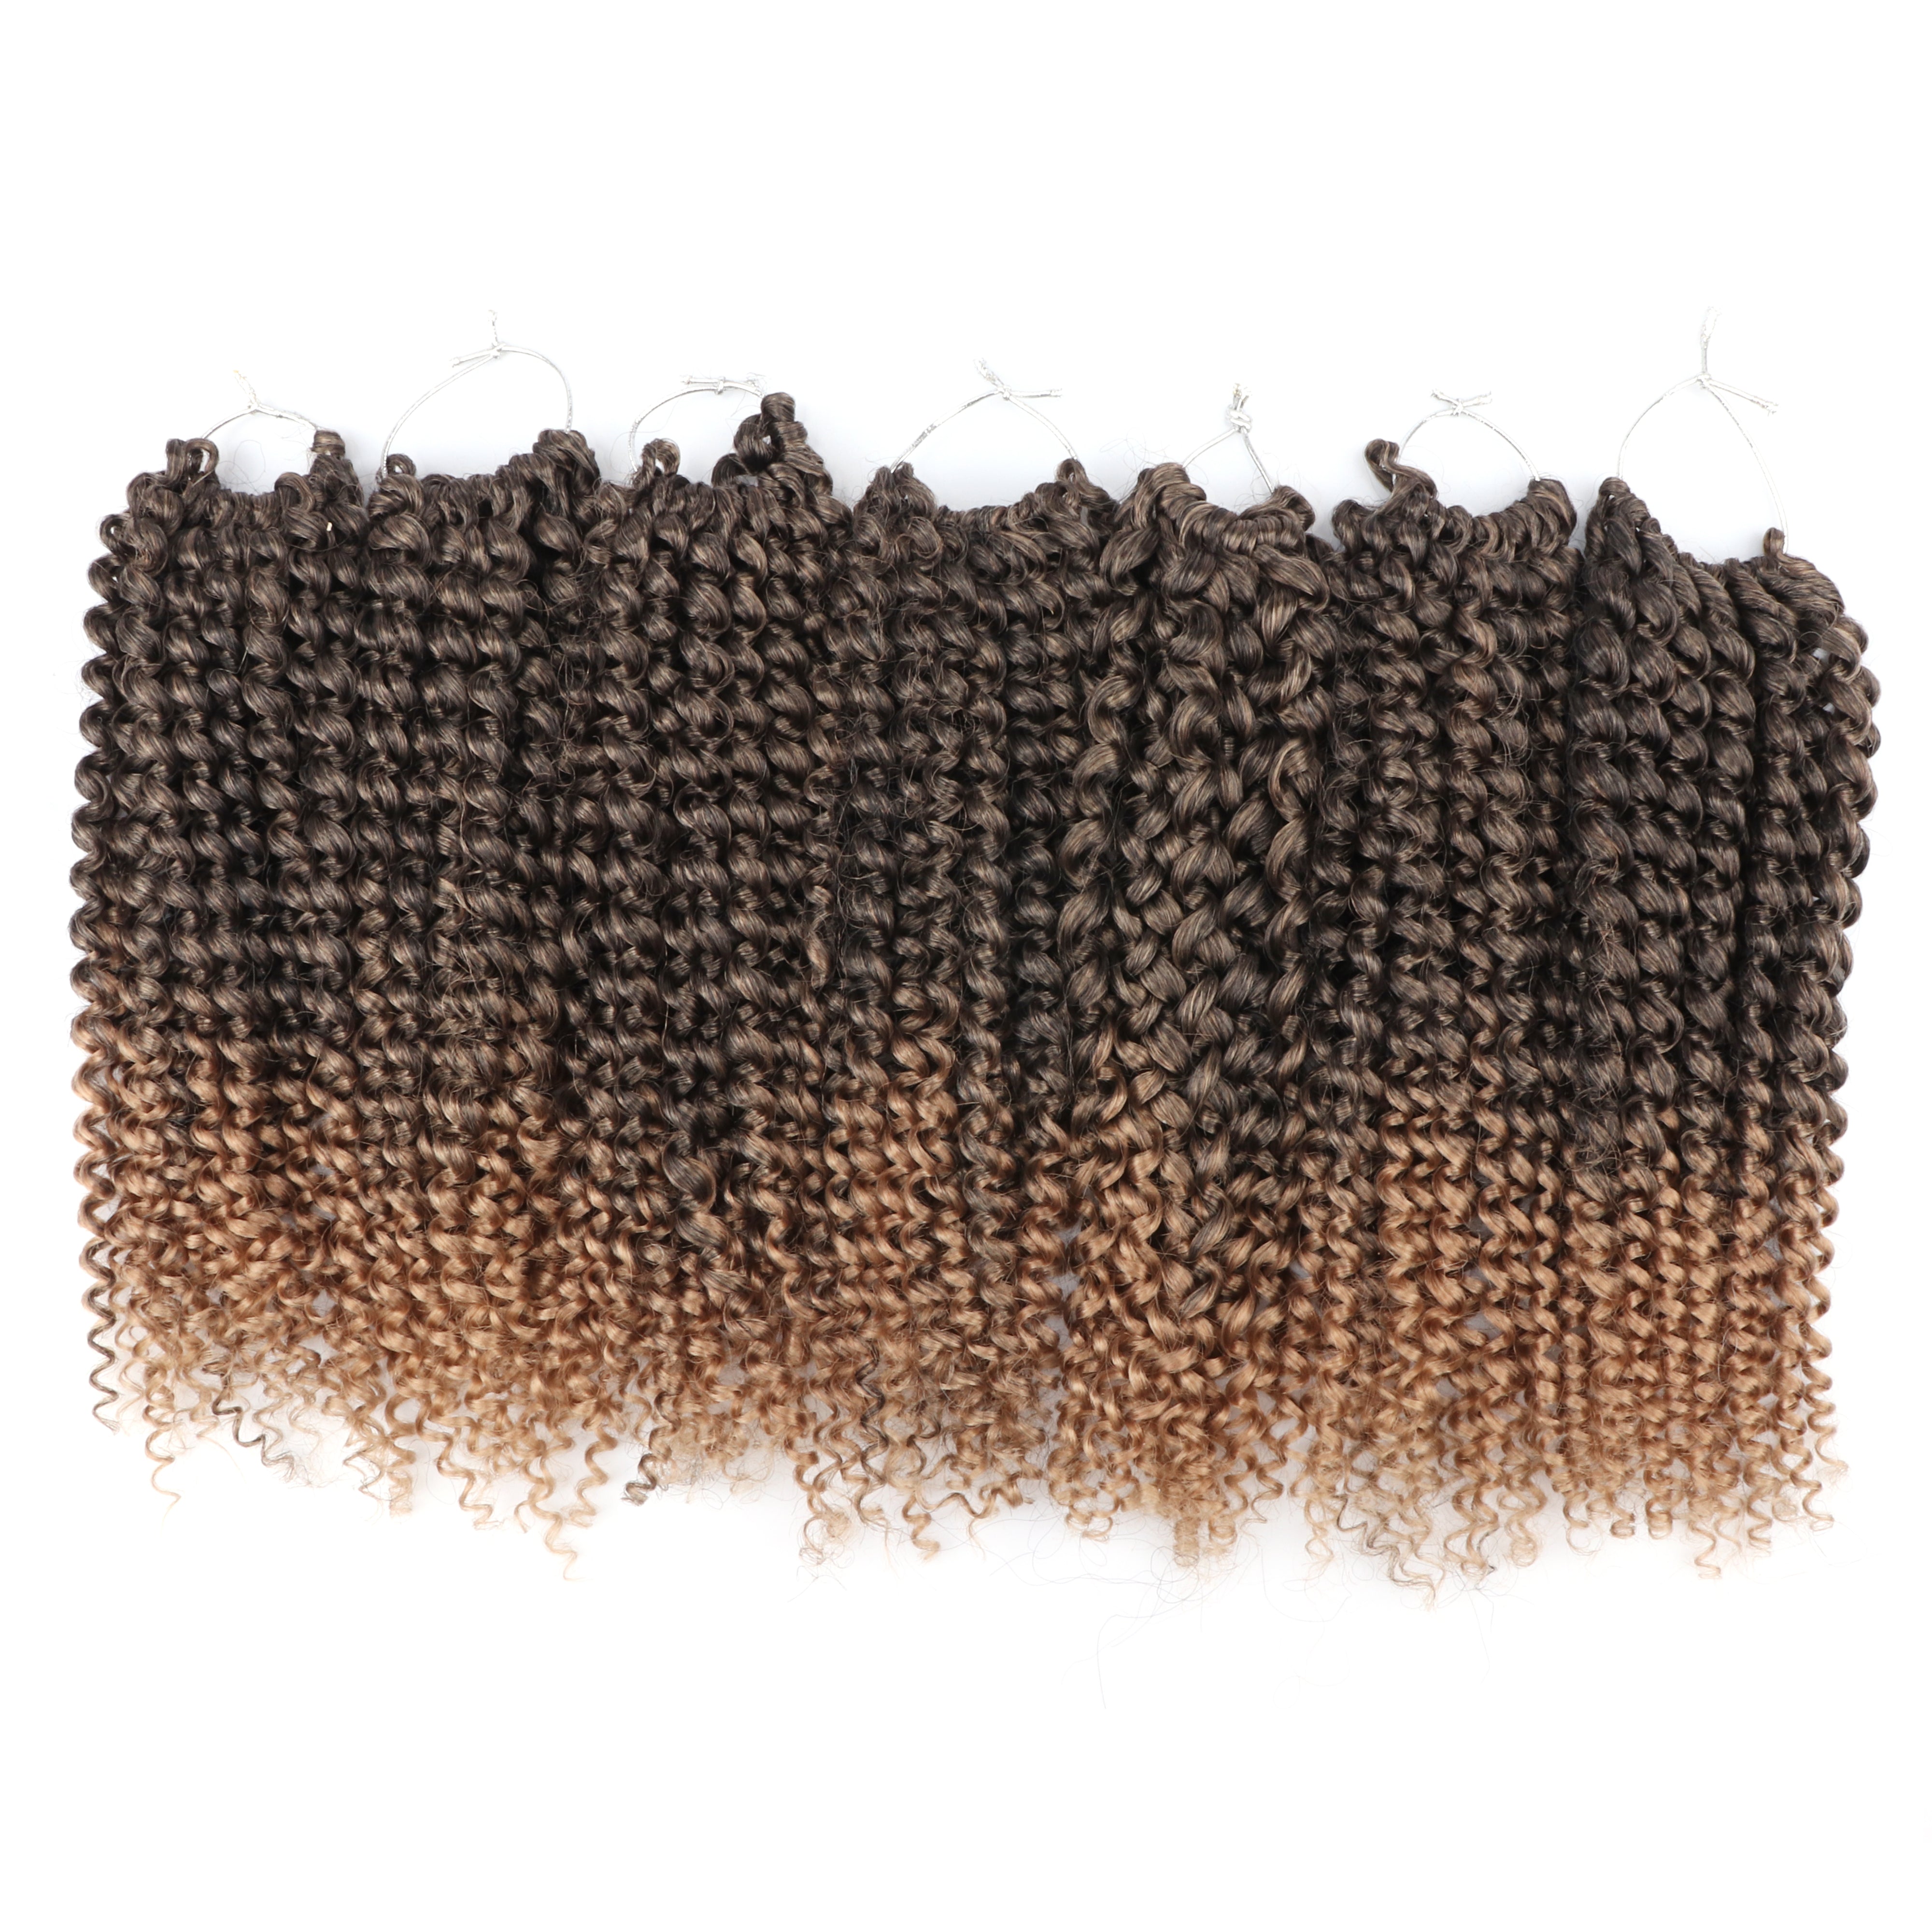 Bohemian Crochet Braiding Hair 12 Inches for Butterfly Locs or Passion Twists - Toyotress